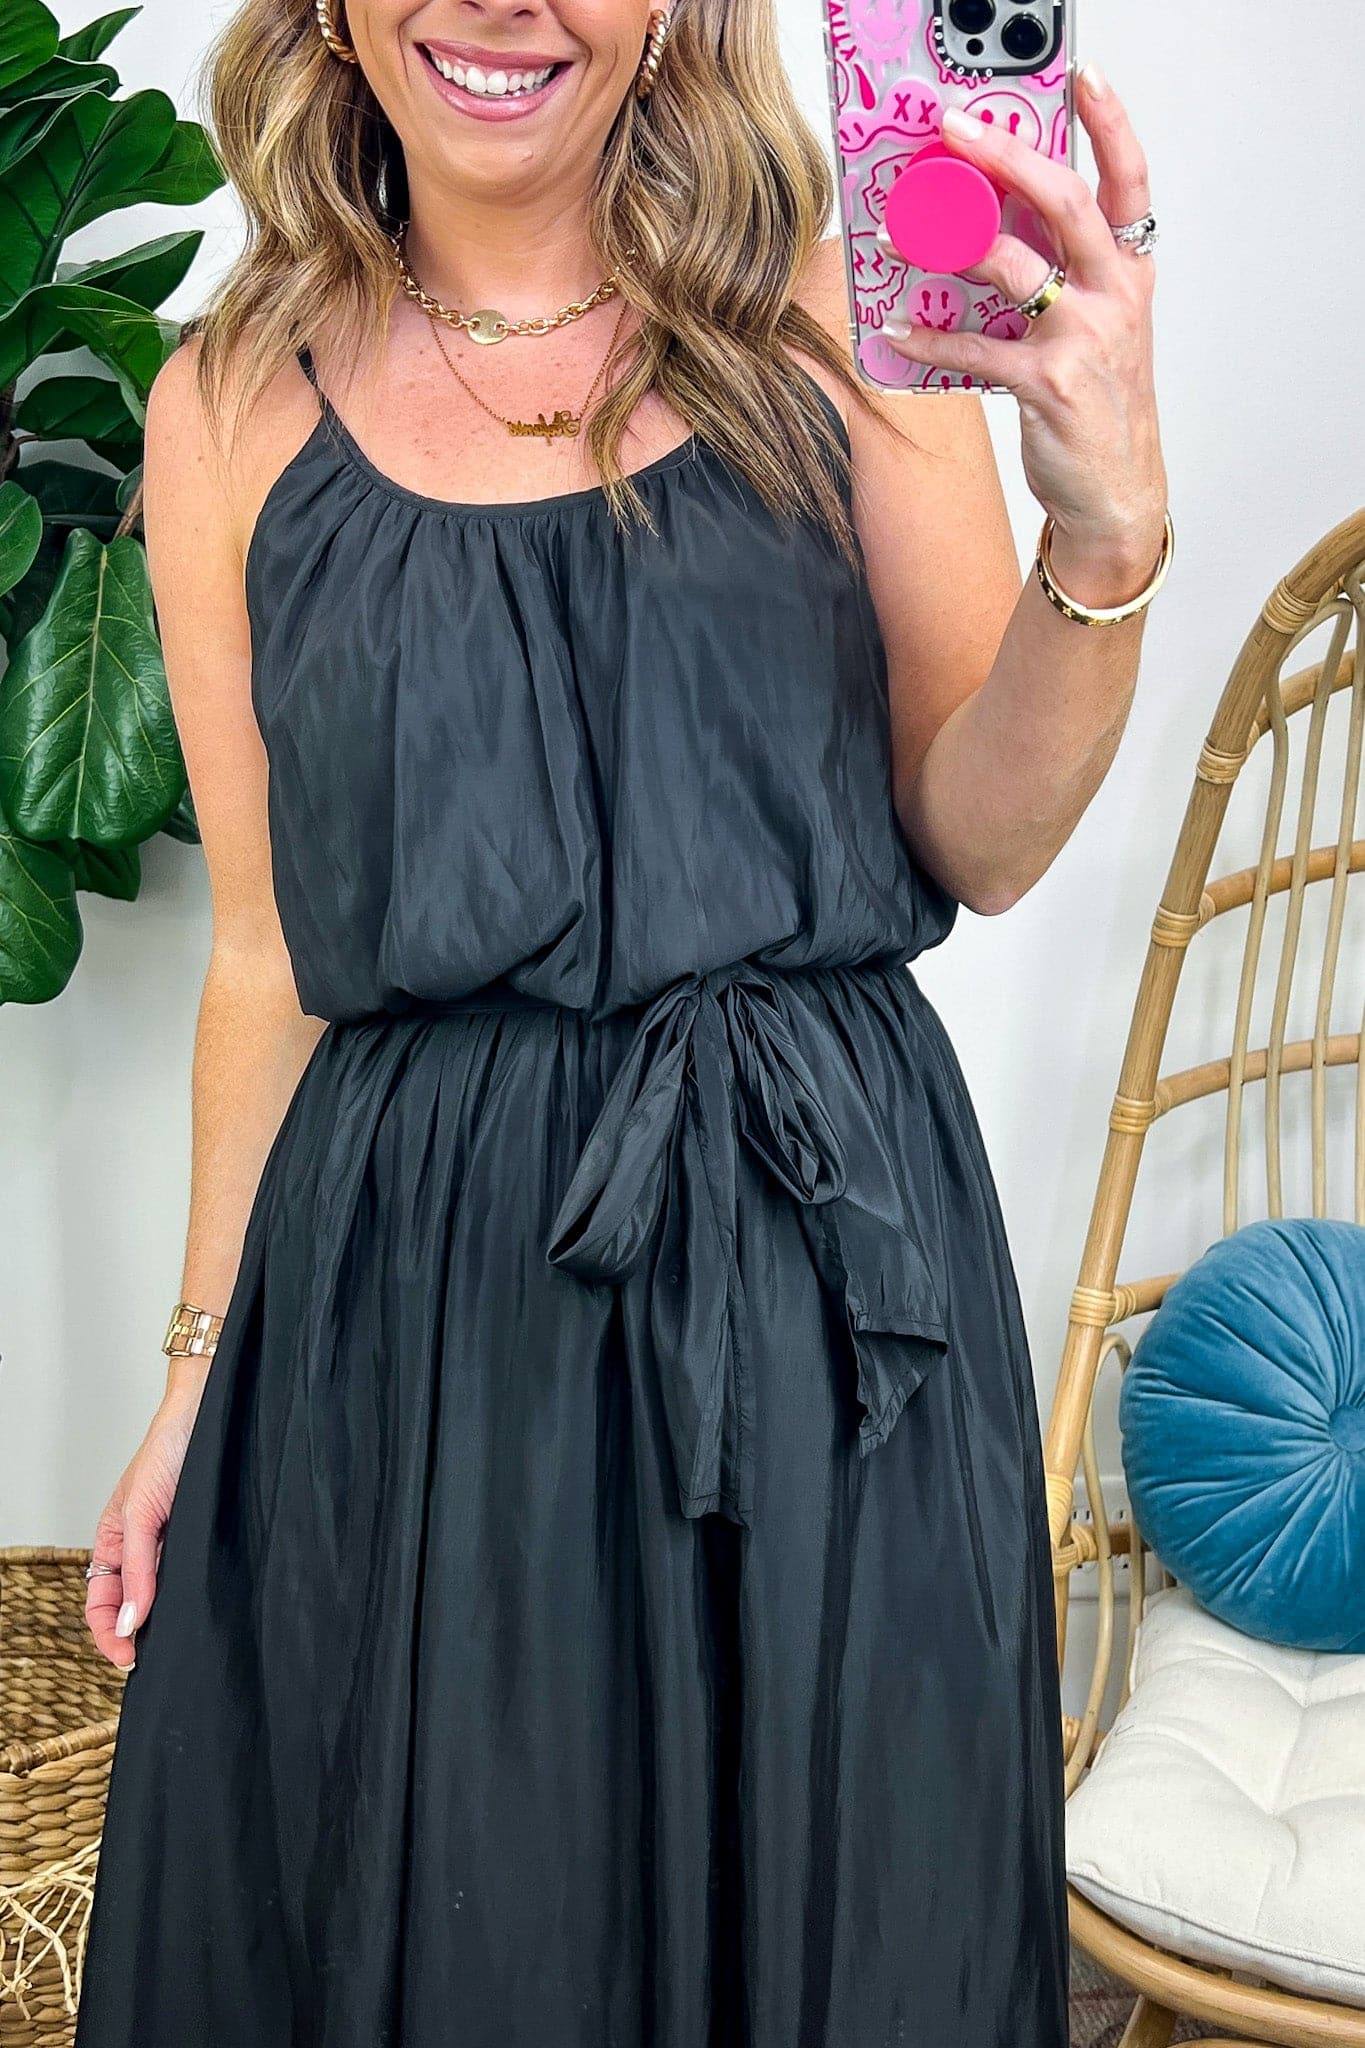  Divinely Inspired Waist Tie Flowy Maxi Dress - Madison and Mallory